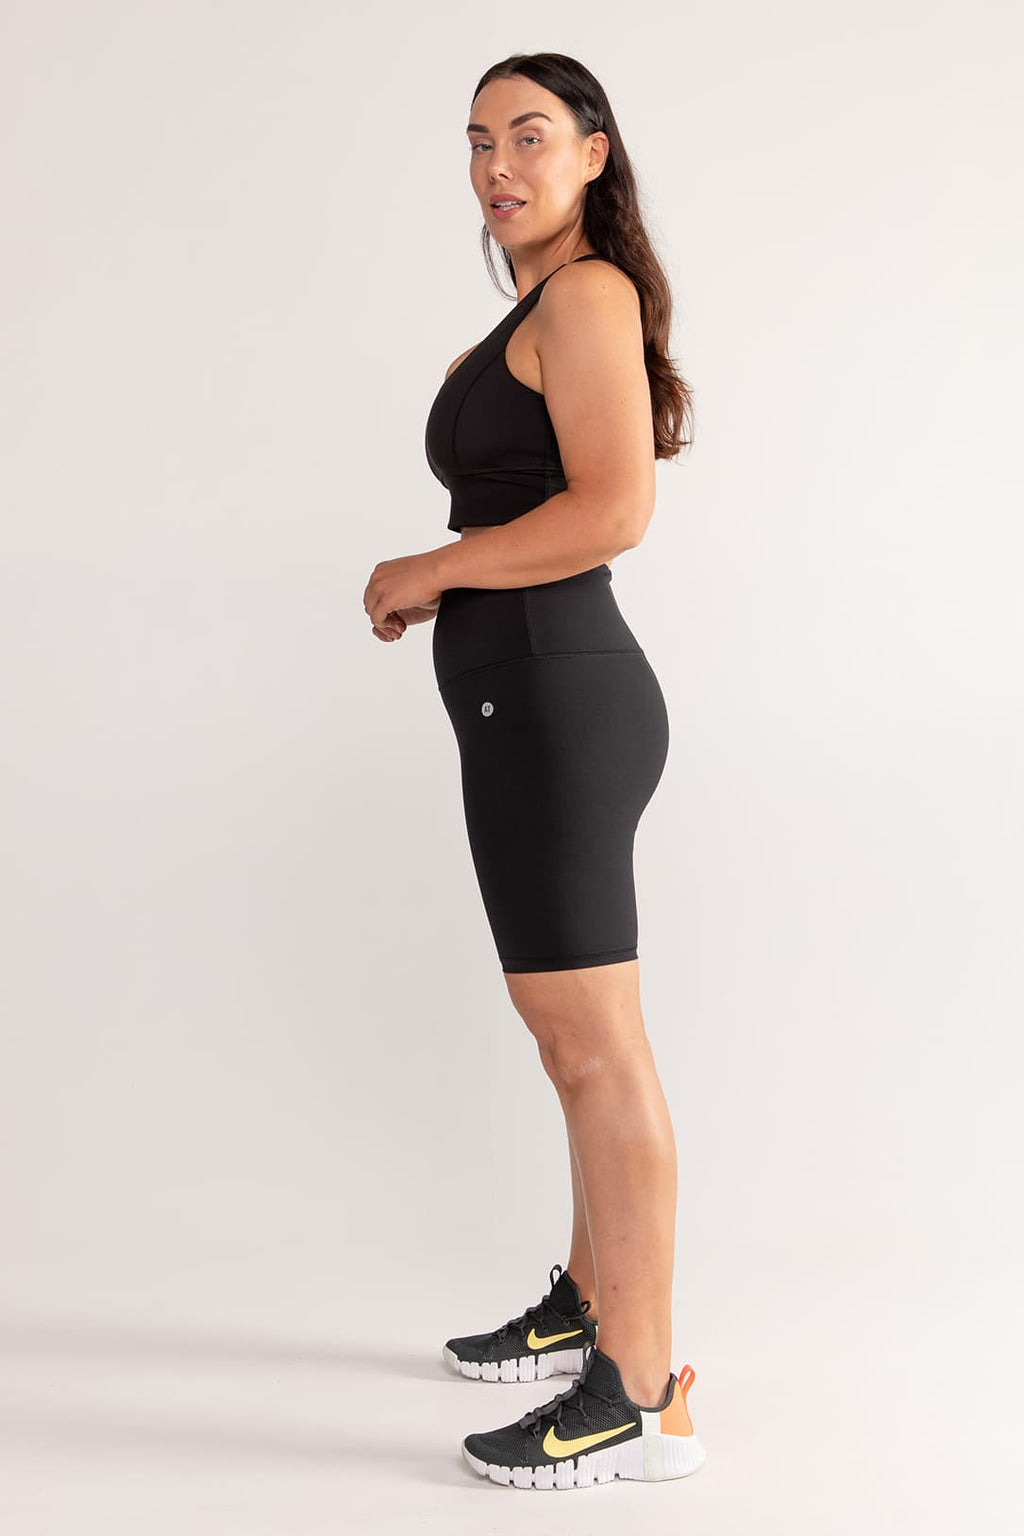 Essential Bike Short - Black from Active Truth™
